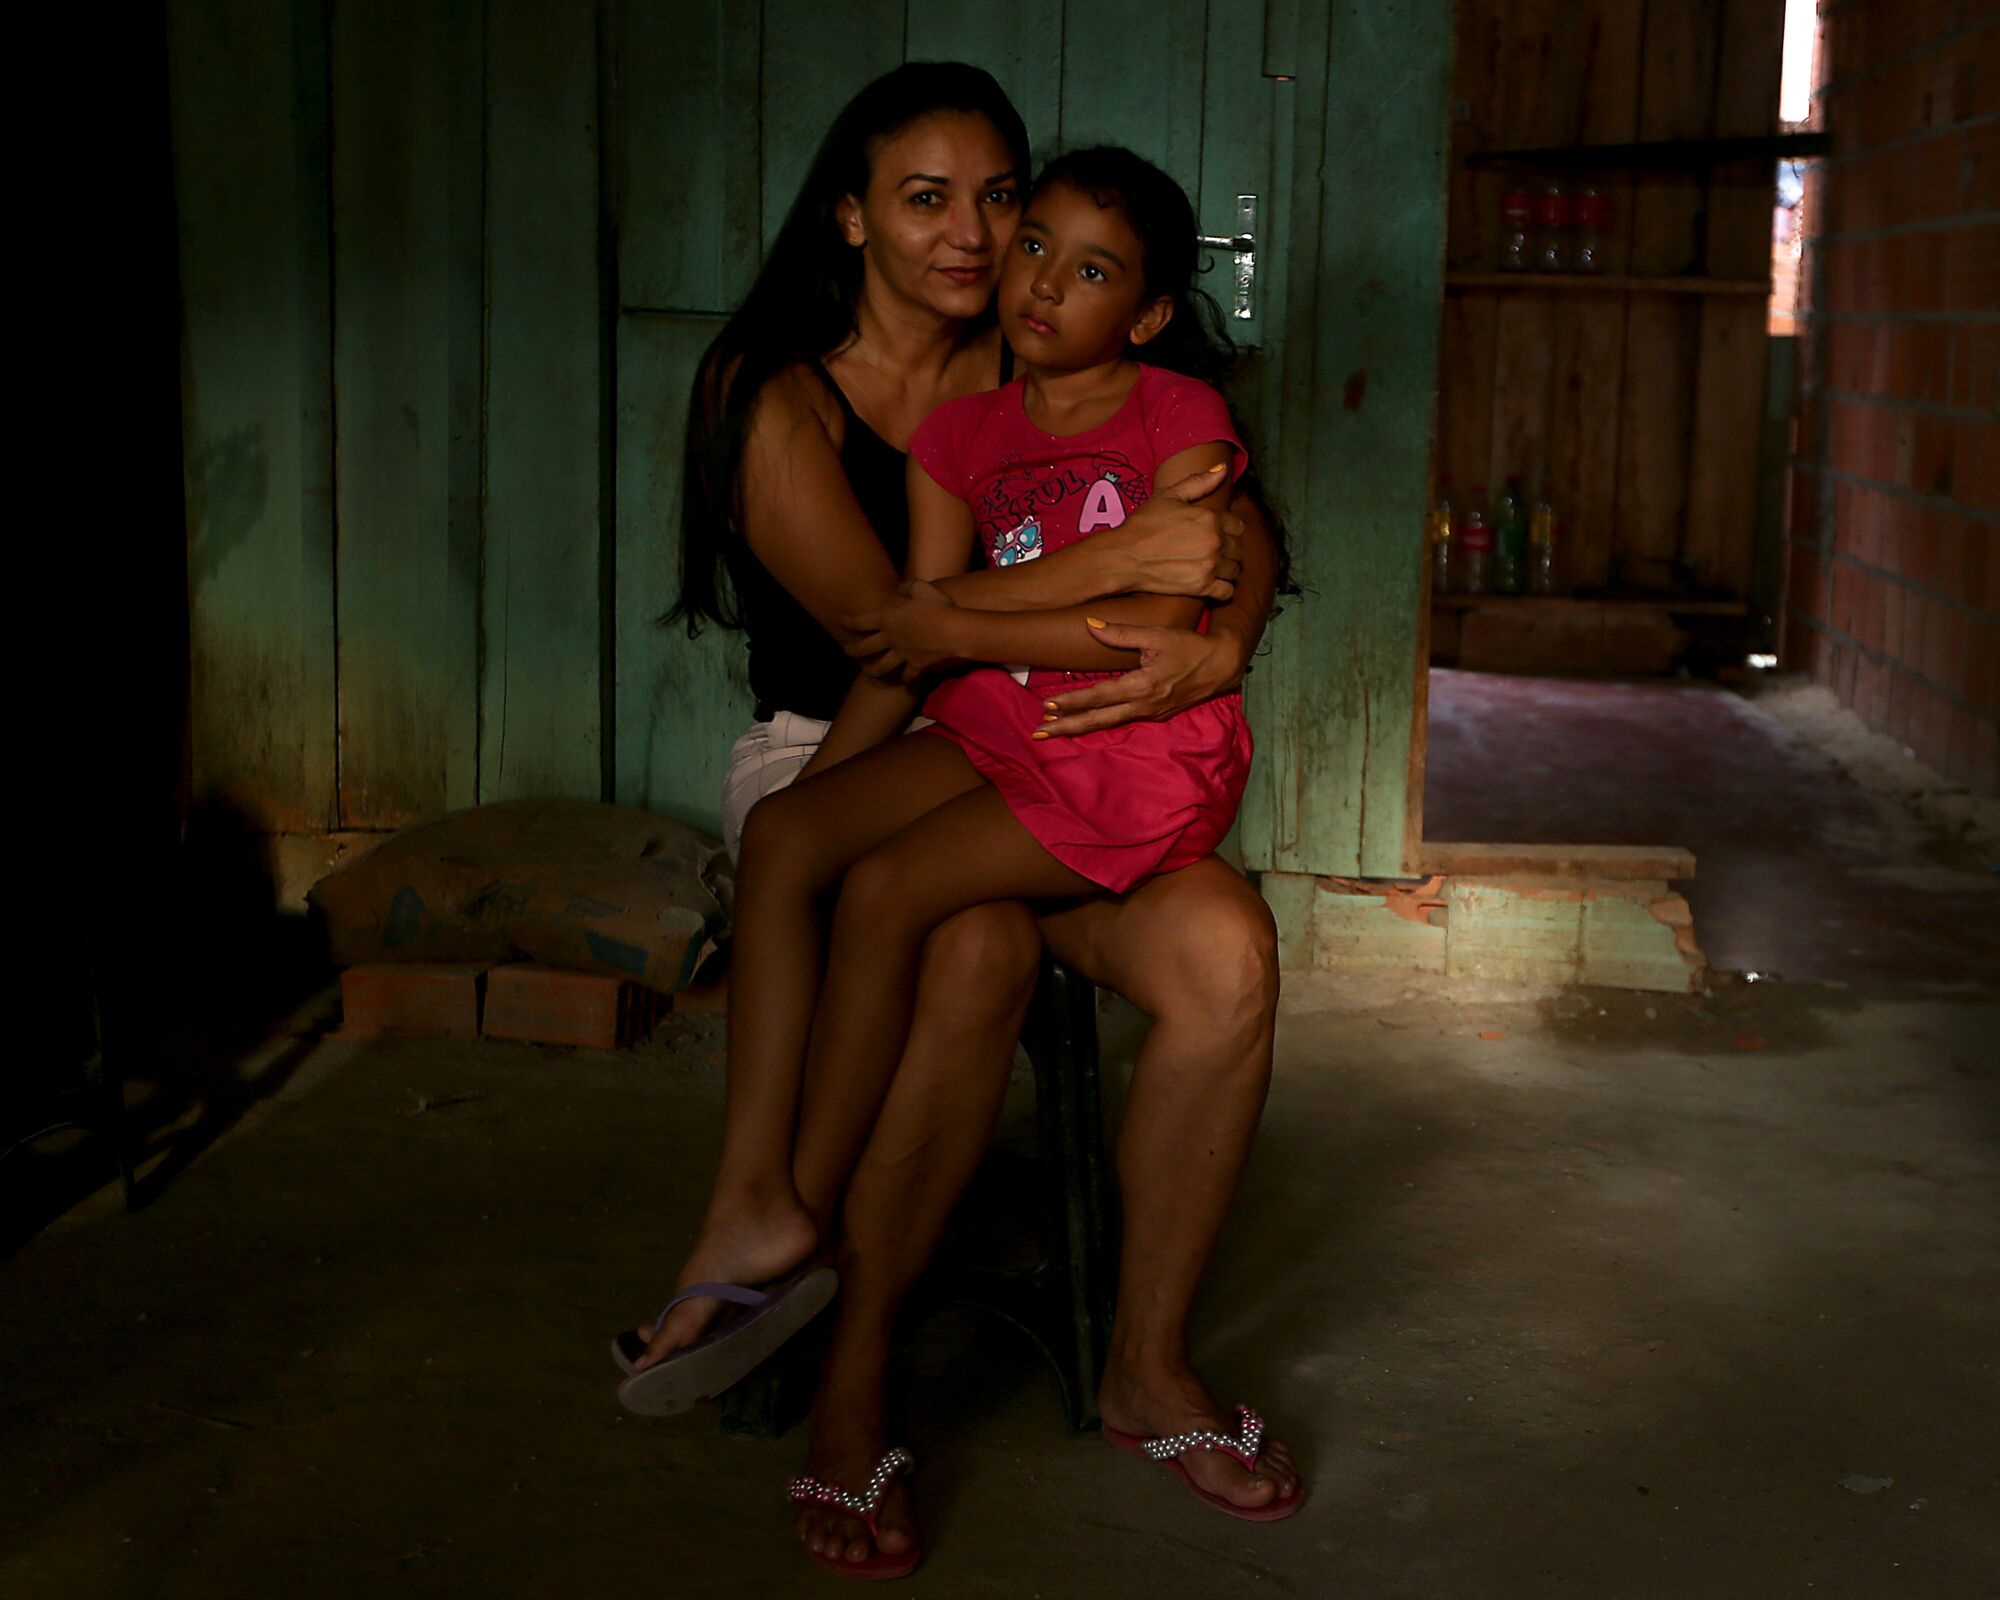 Ludernilce Peixoto Costa, 43, embraces her daughter Adrielly, 6, at their home on the outskirts of Manaus, Brazil.